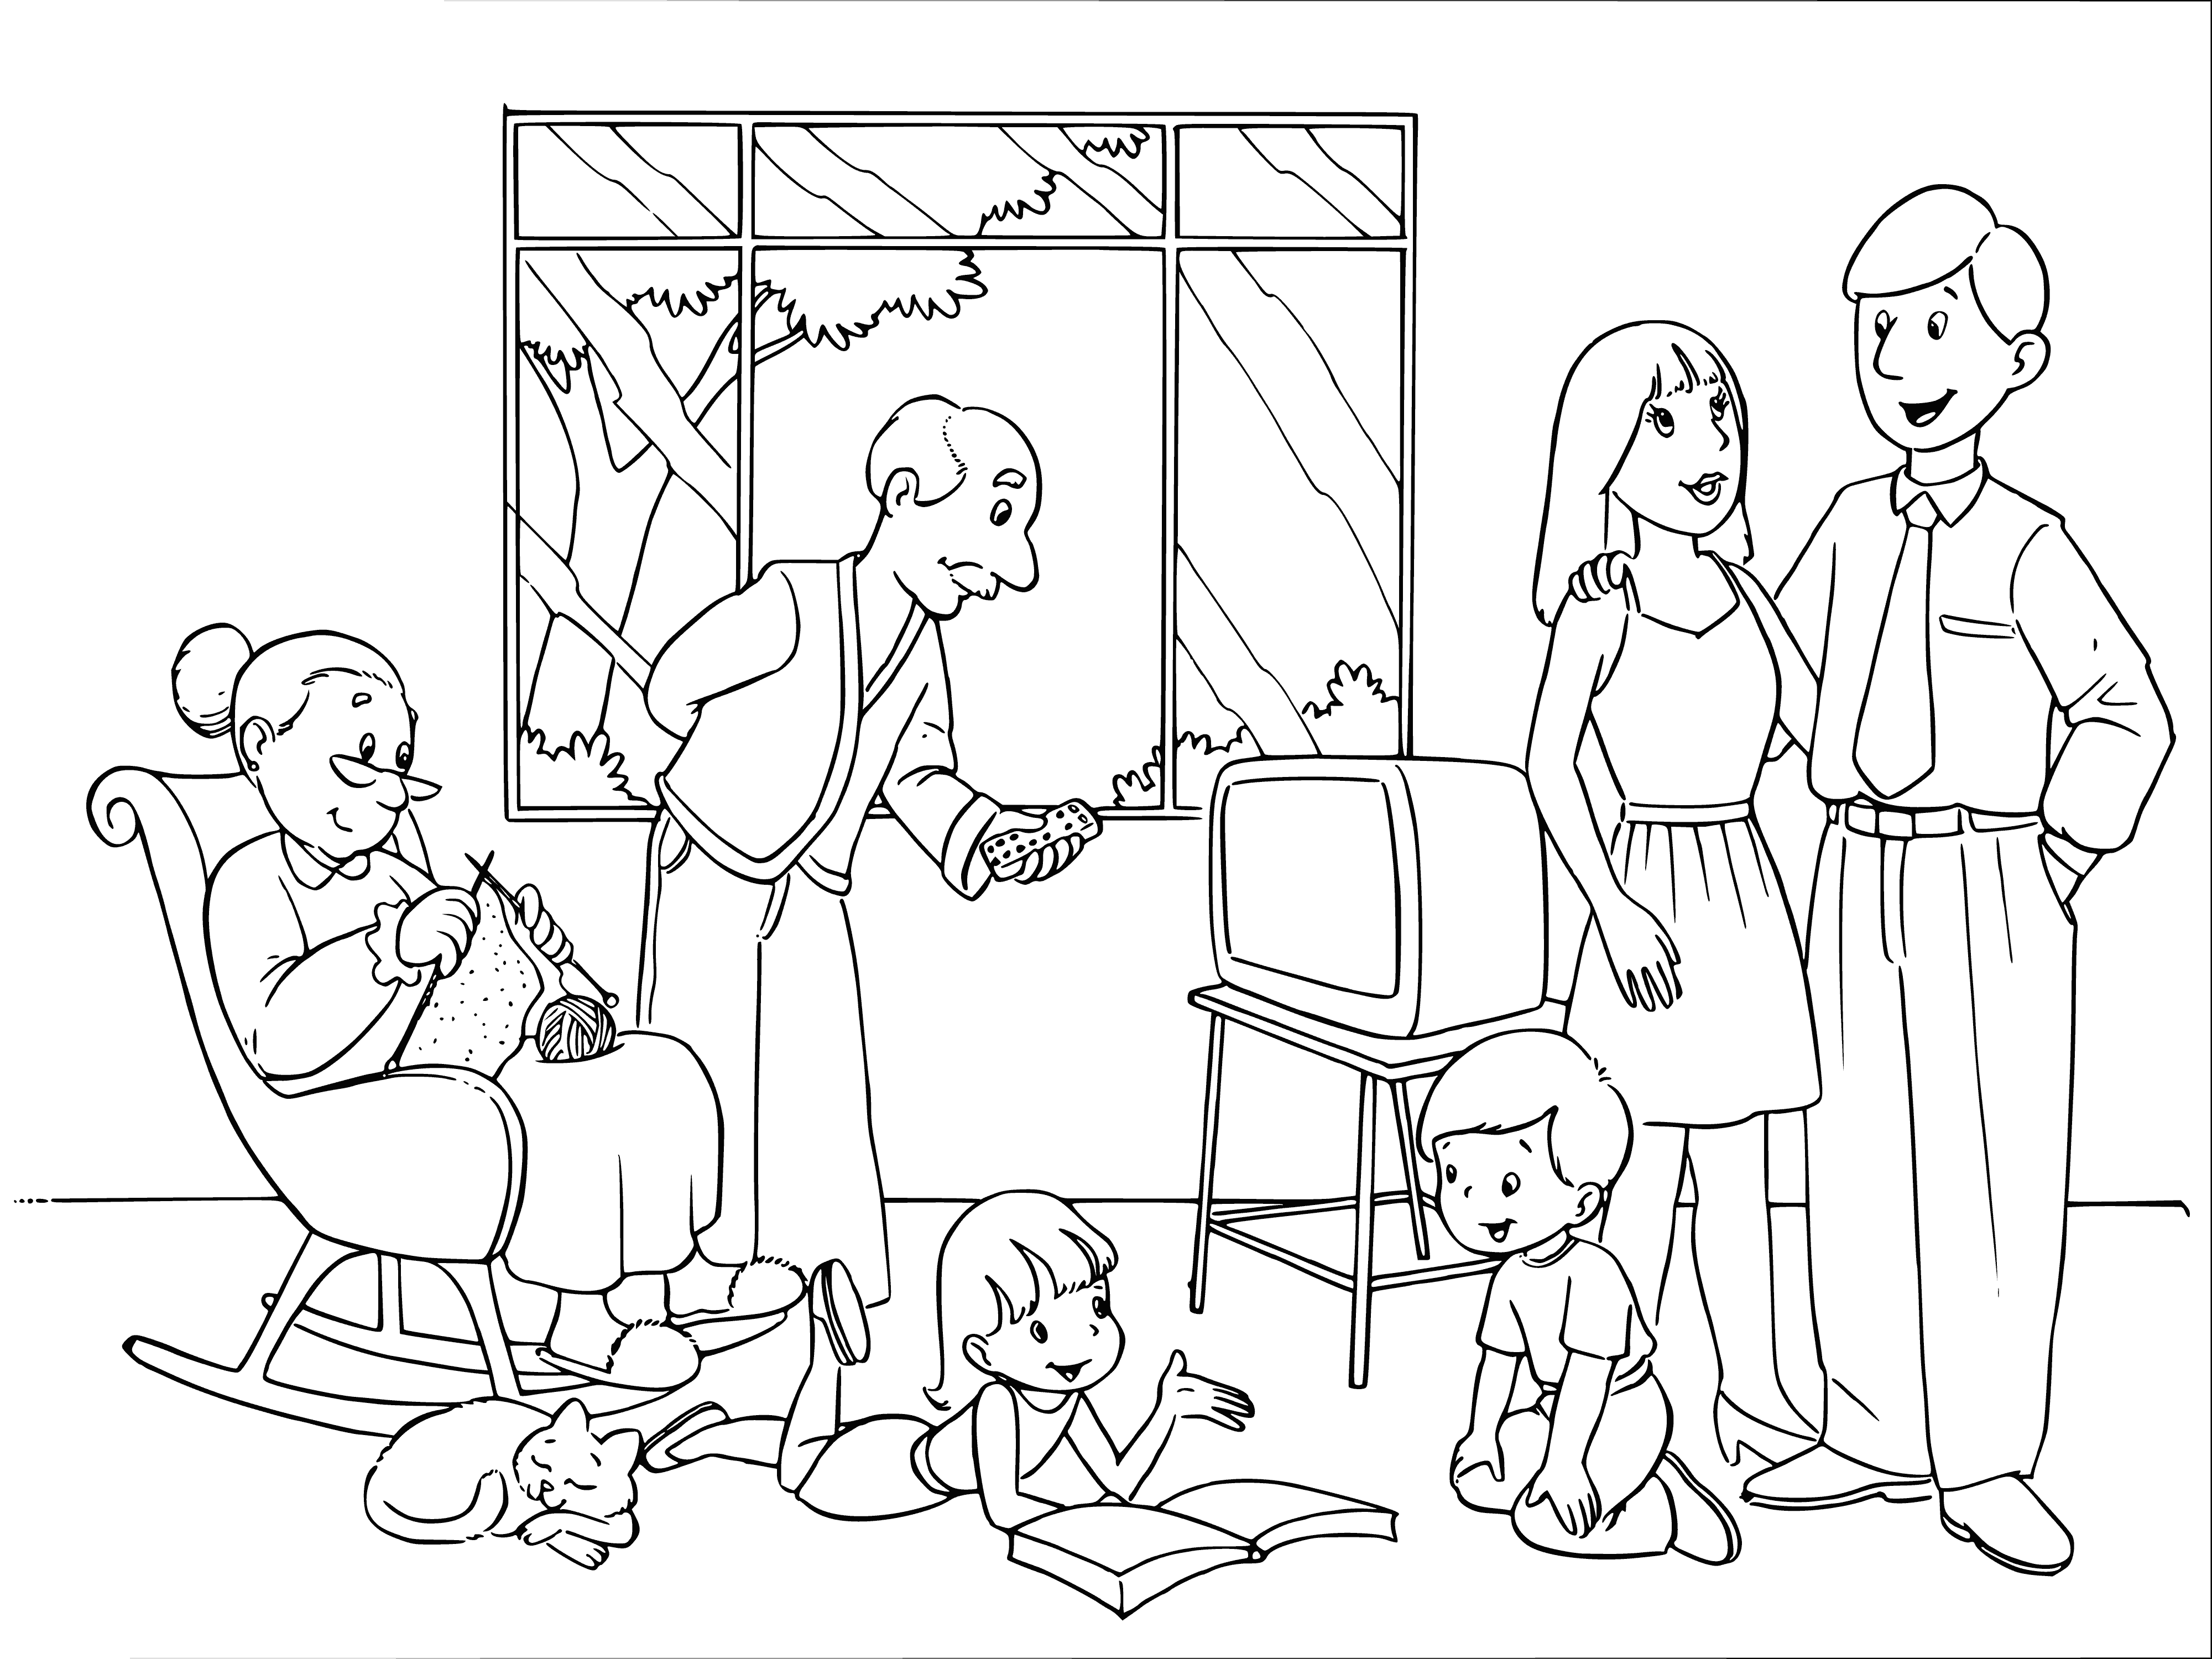 A family coloring page